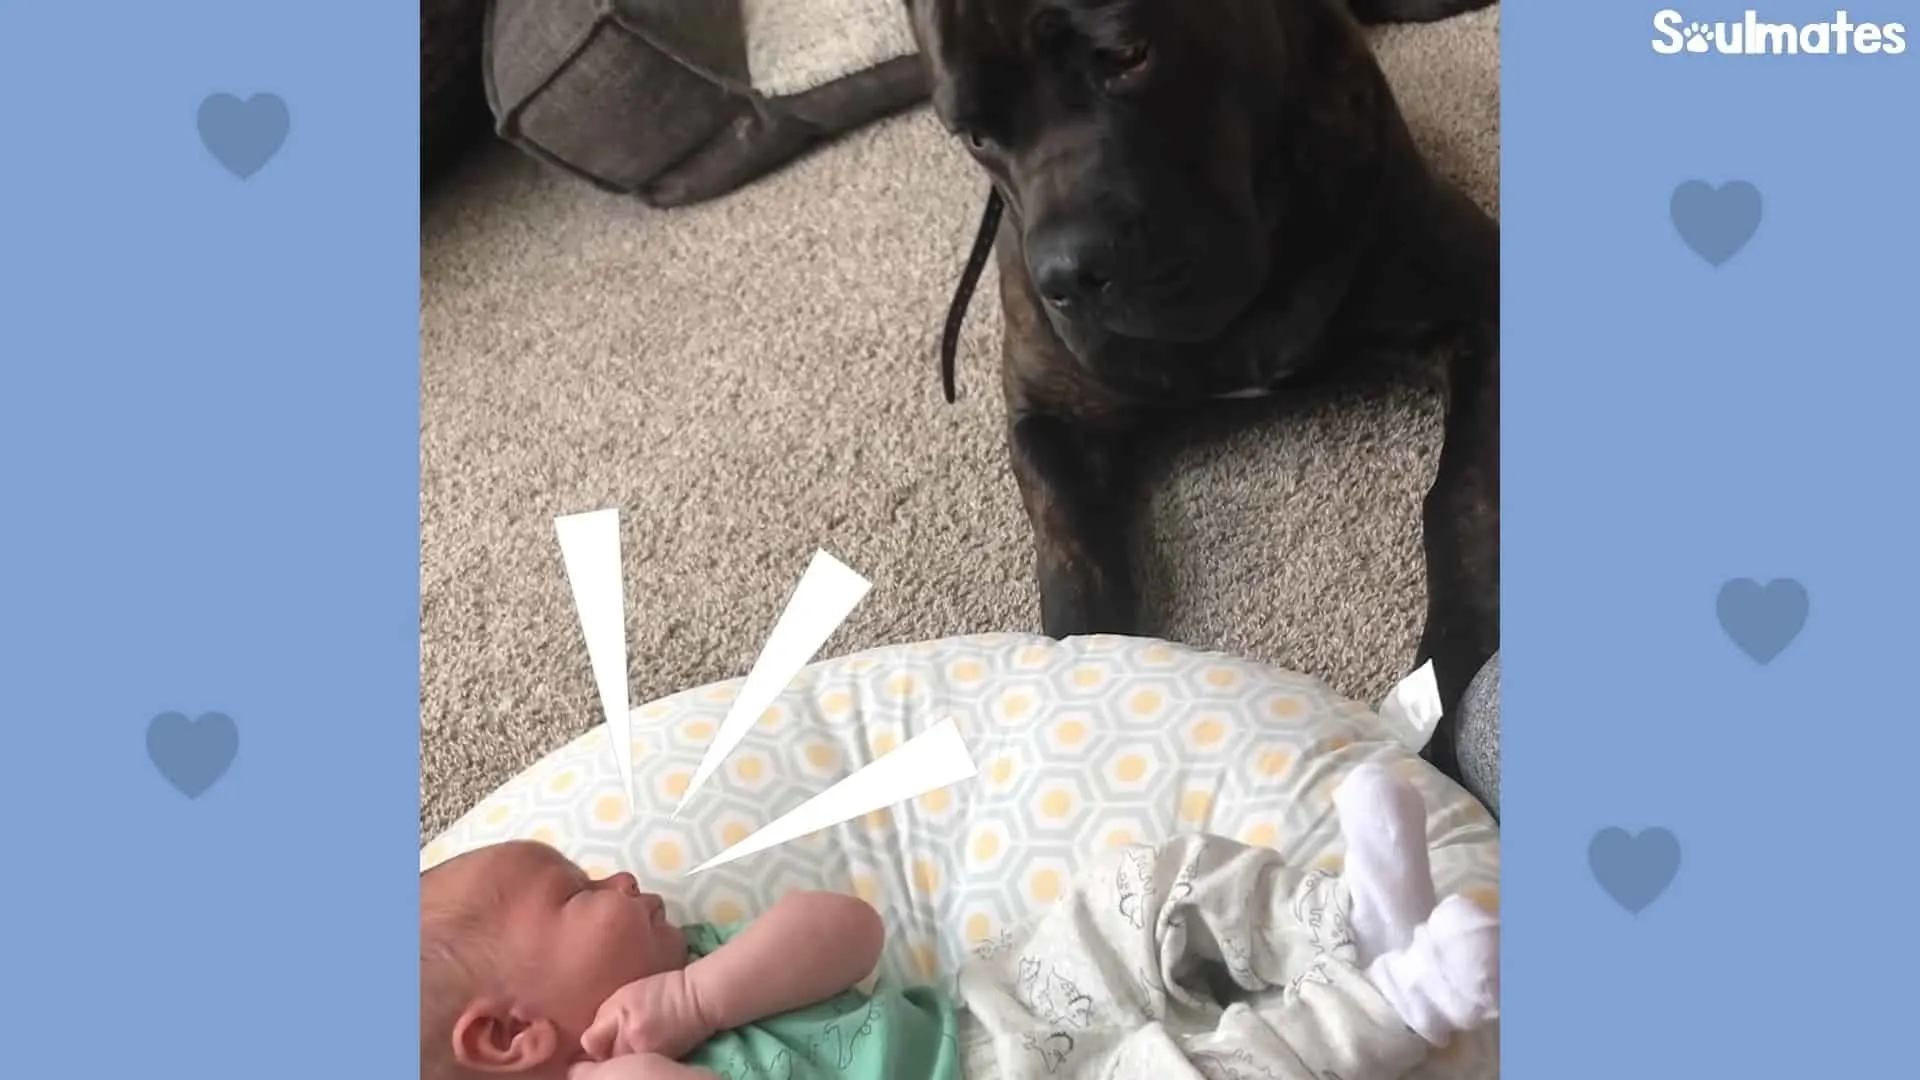 cane corso watching a small baby